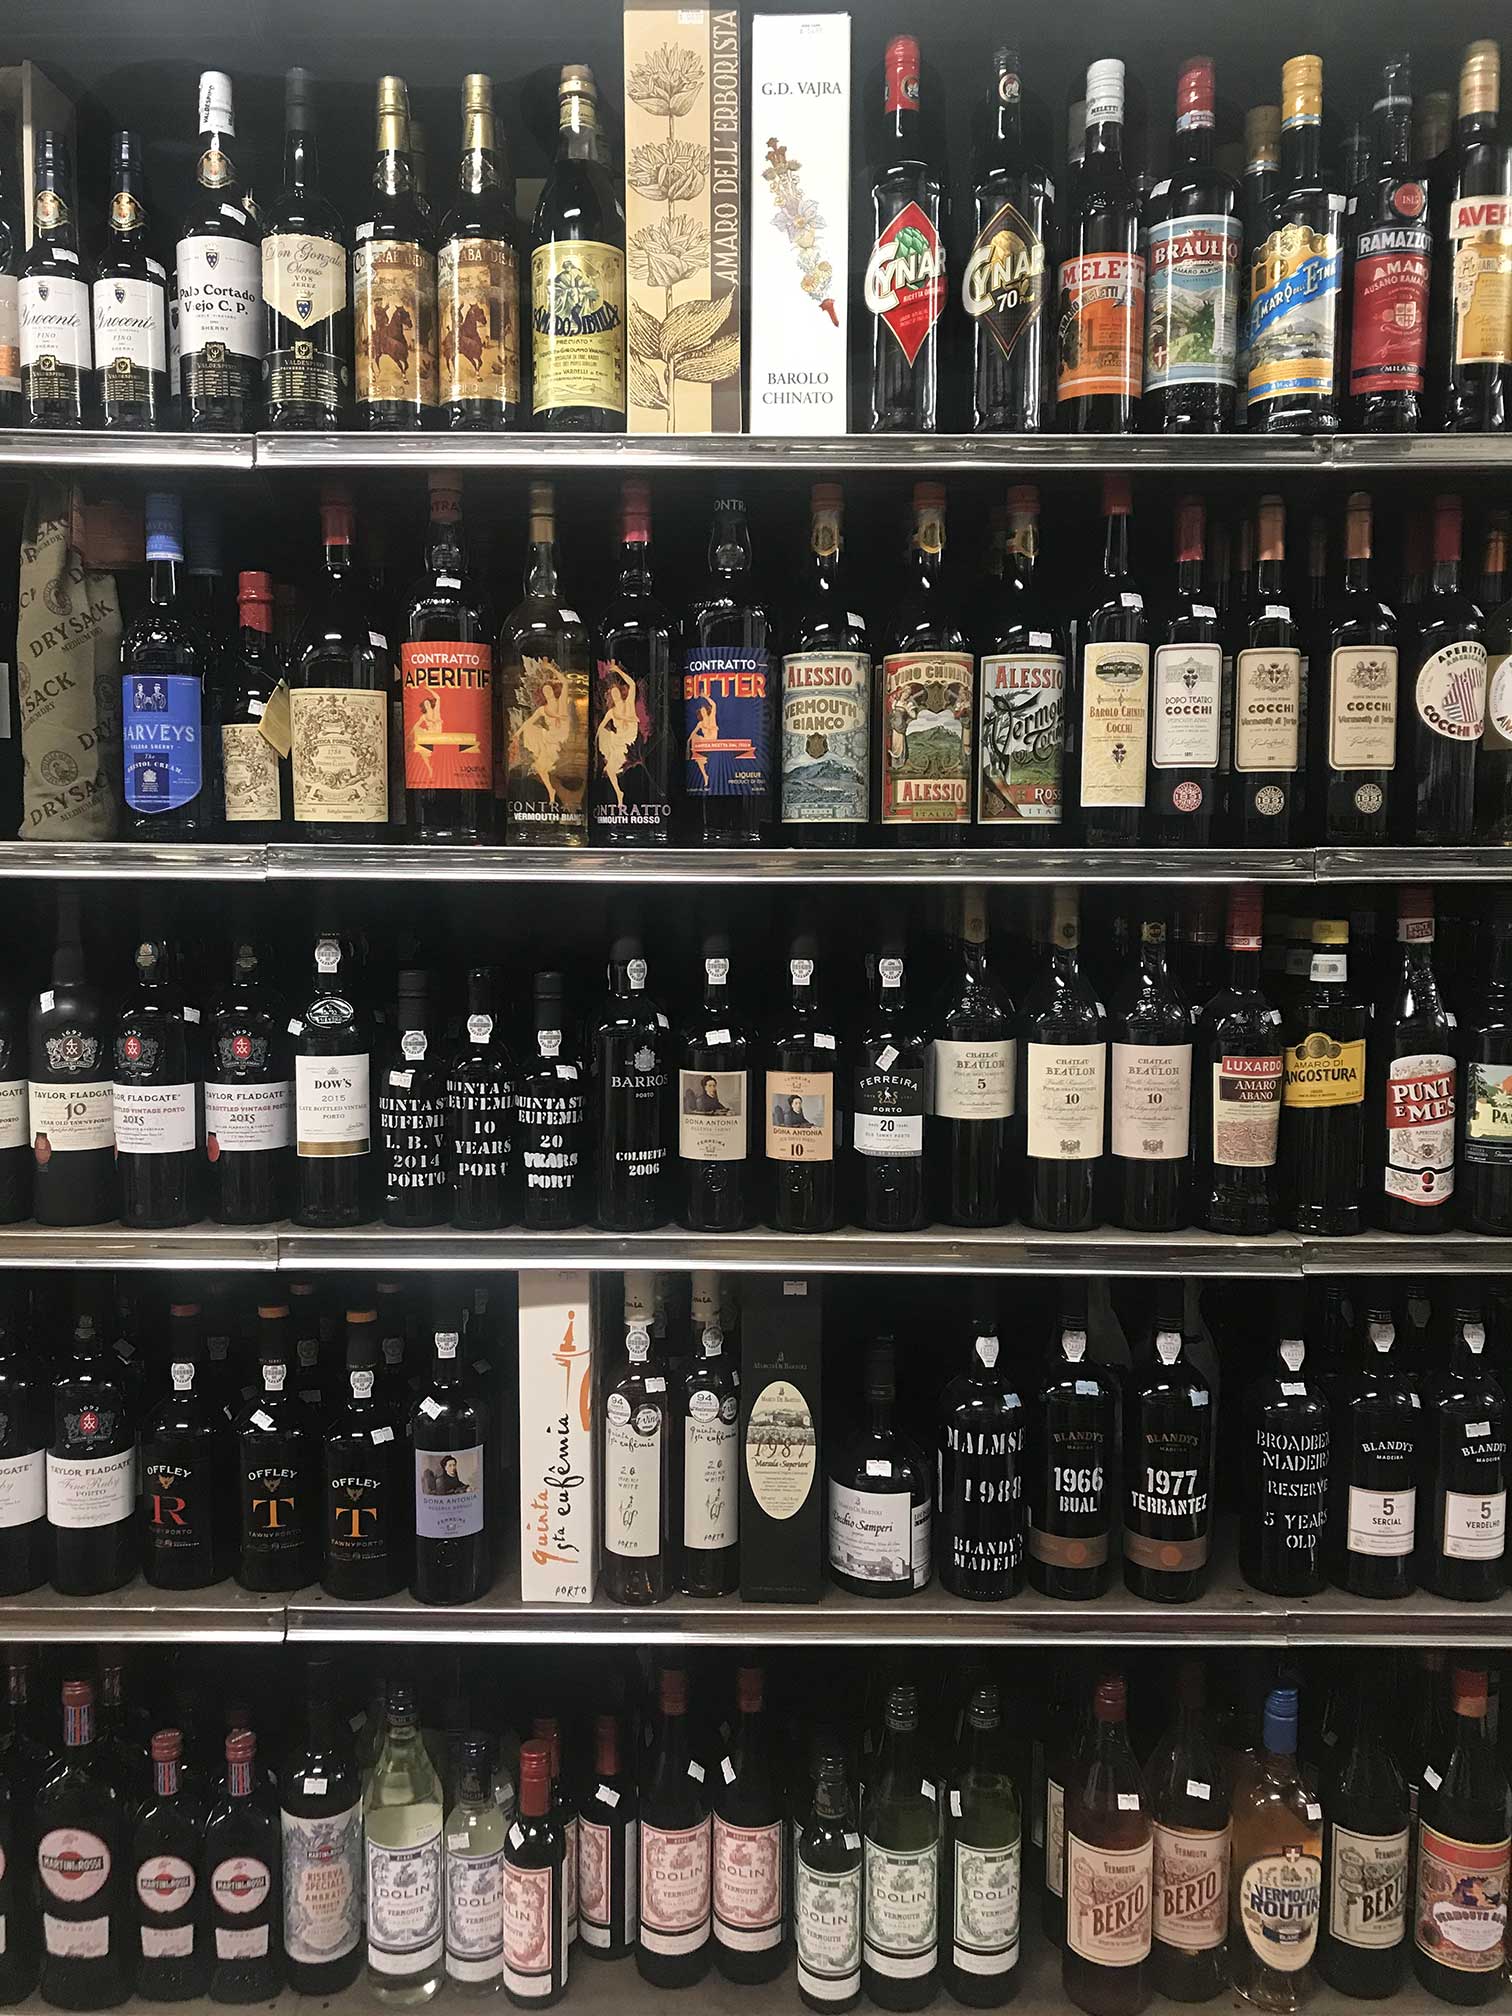 bitters, port and vermouth shelf